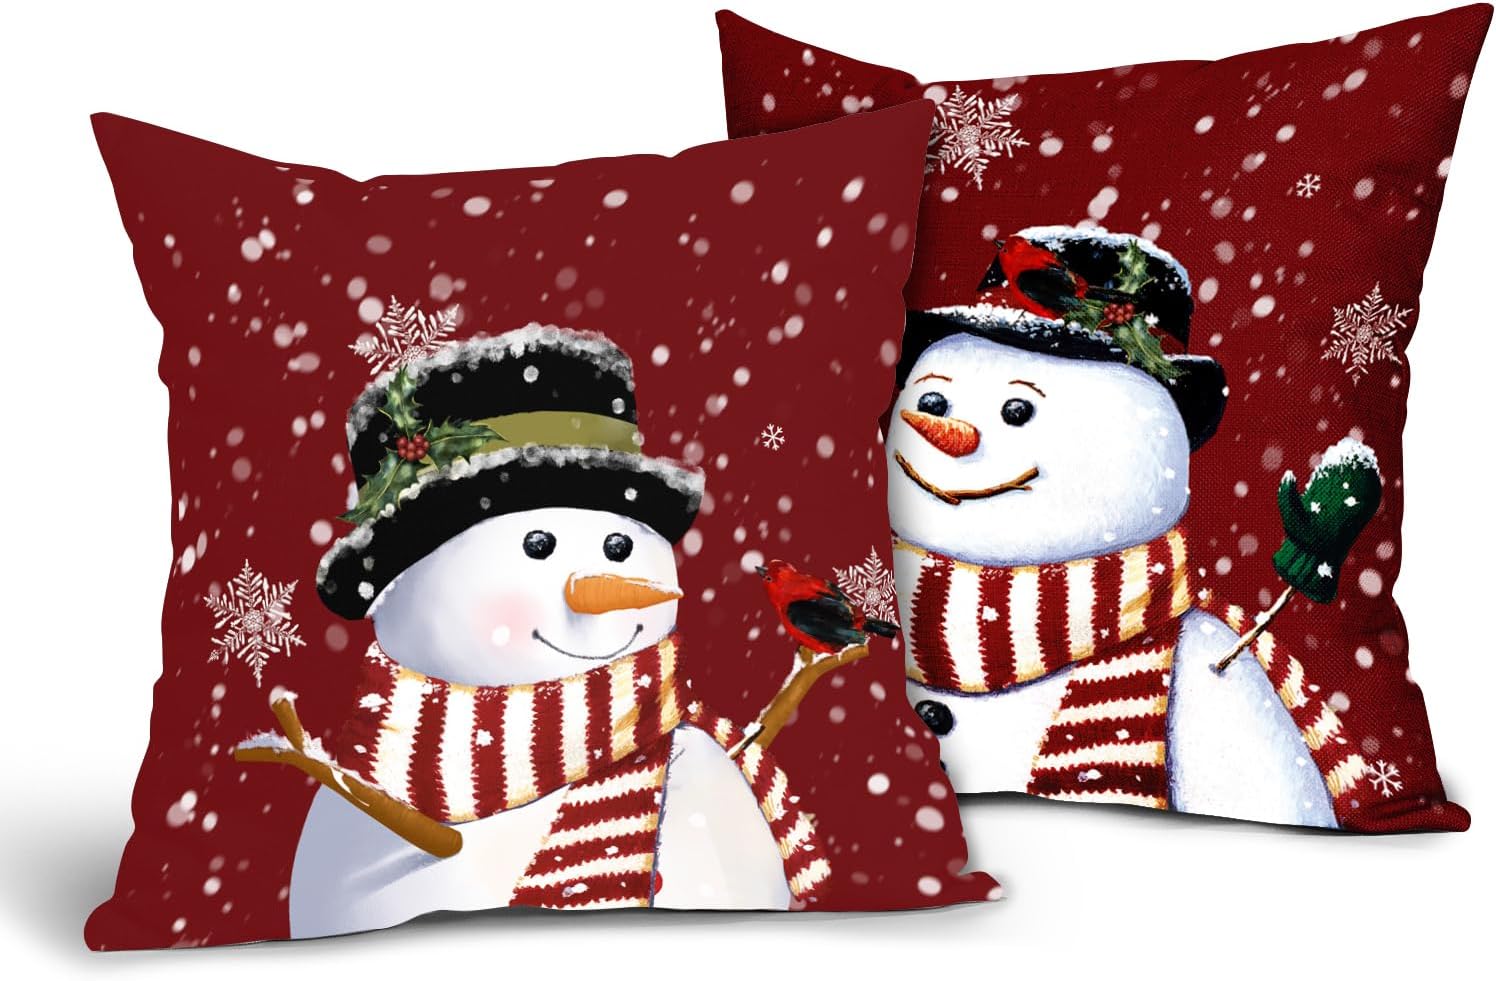 Red Winter Throw Pillow Covers 18x18 Inch Set of 2 Christmas Snowman Pillow Covers Snowflake Farmhouse Pillowscase Cotton Linen Square Cushion Cover for Sofa Couch Bedroom Living Room Home Decoration